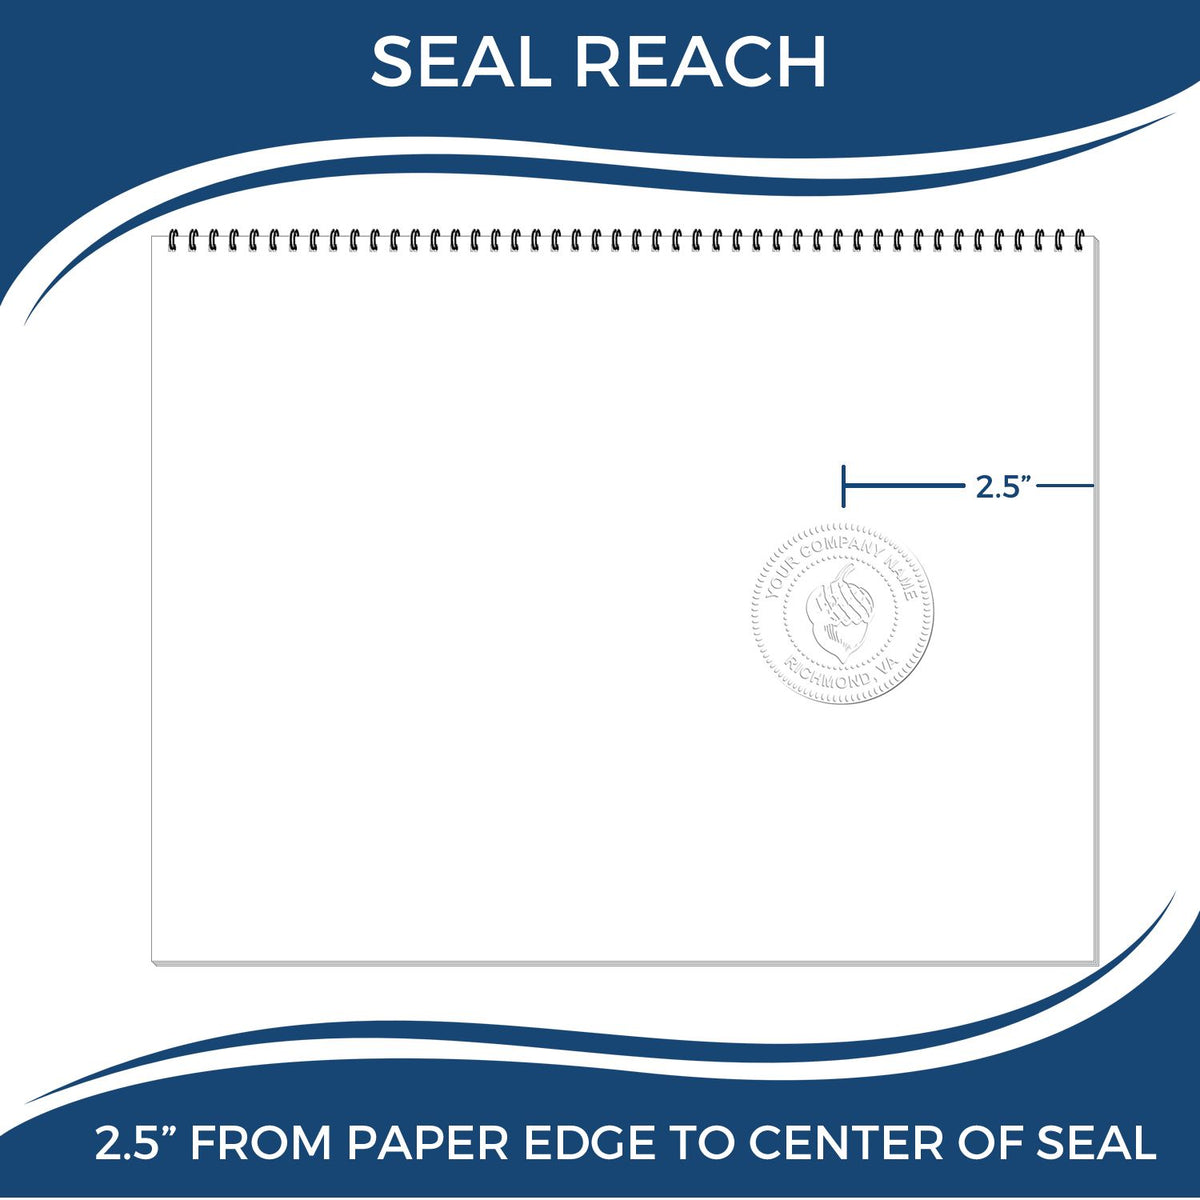 An infographic showing the seal reach which is represented by a ruler and a miniature seal image of the Heavy Duty Cast Iron Nevada Engineer Seal Embosser